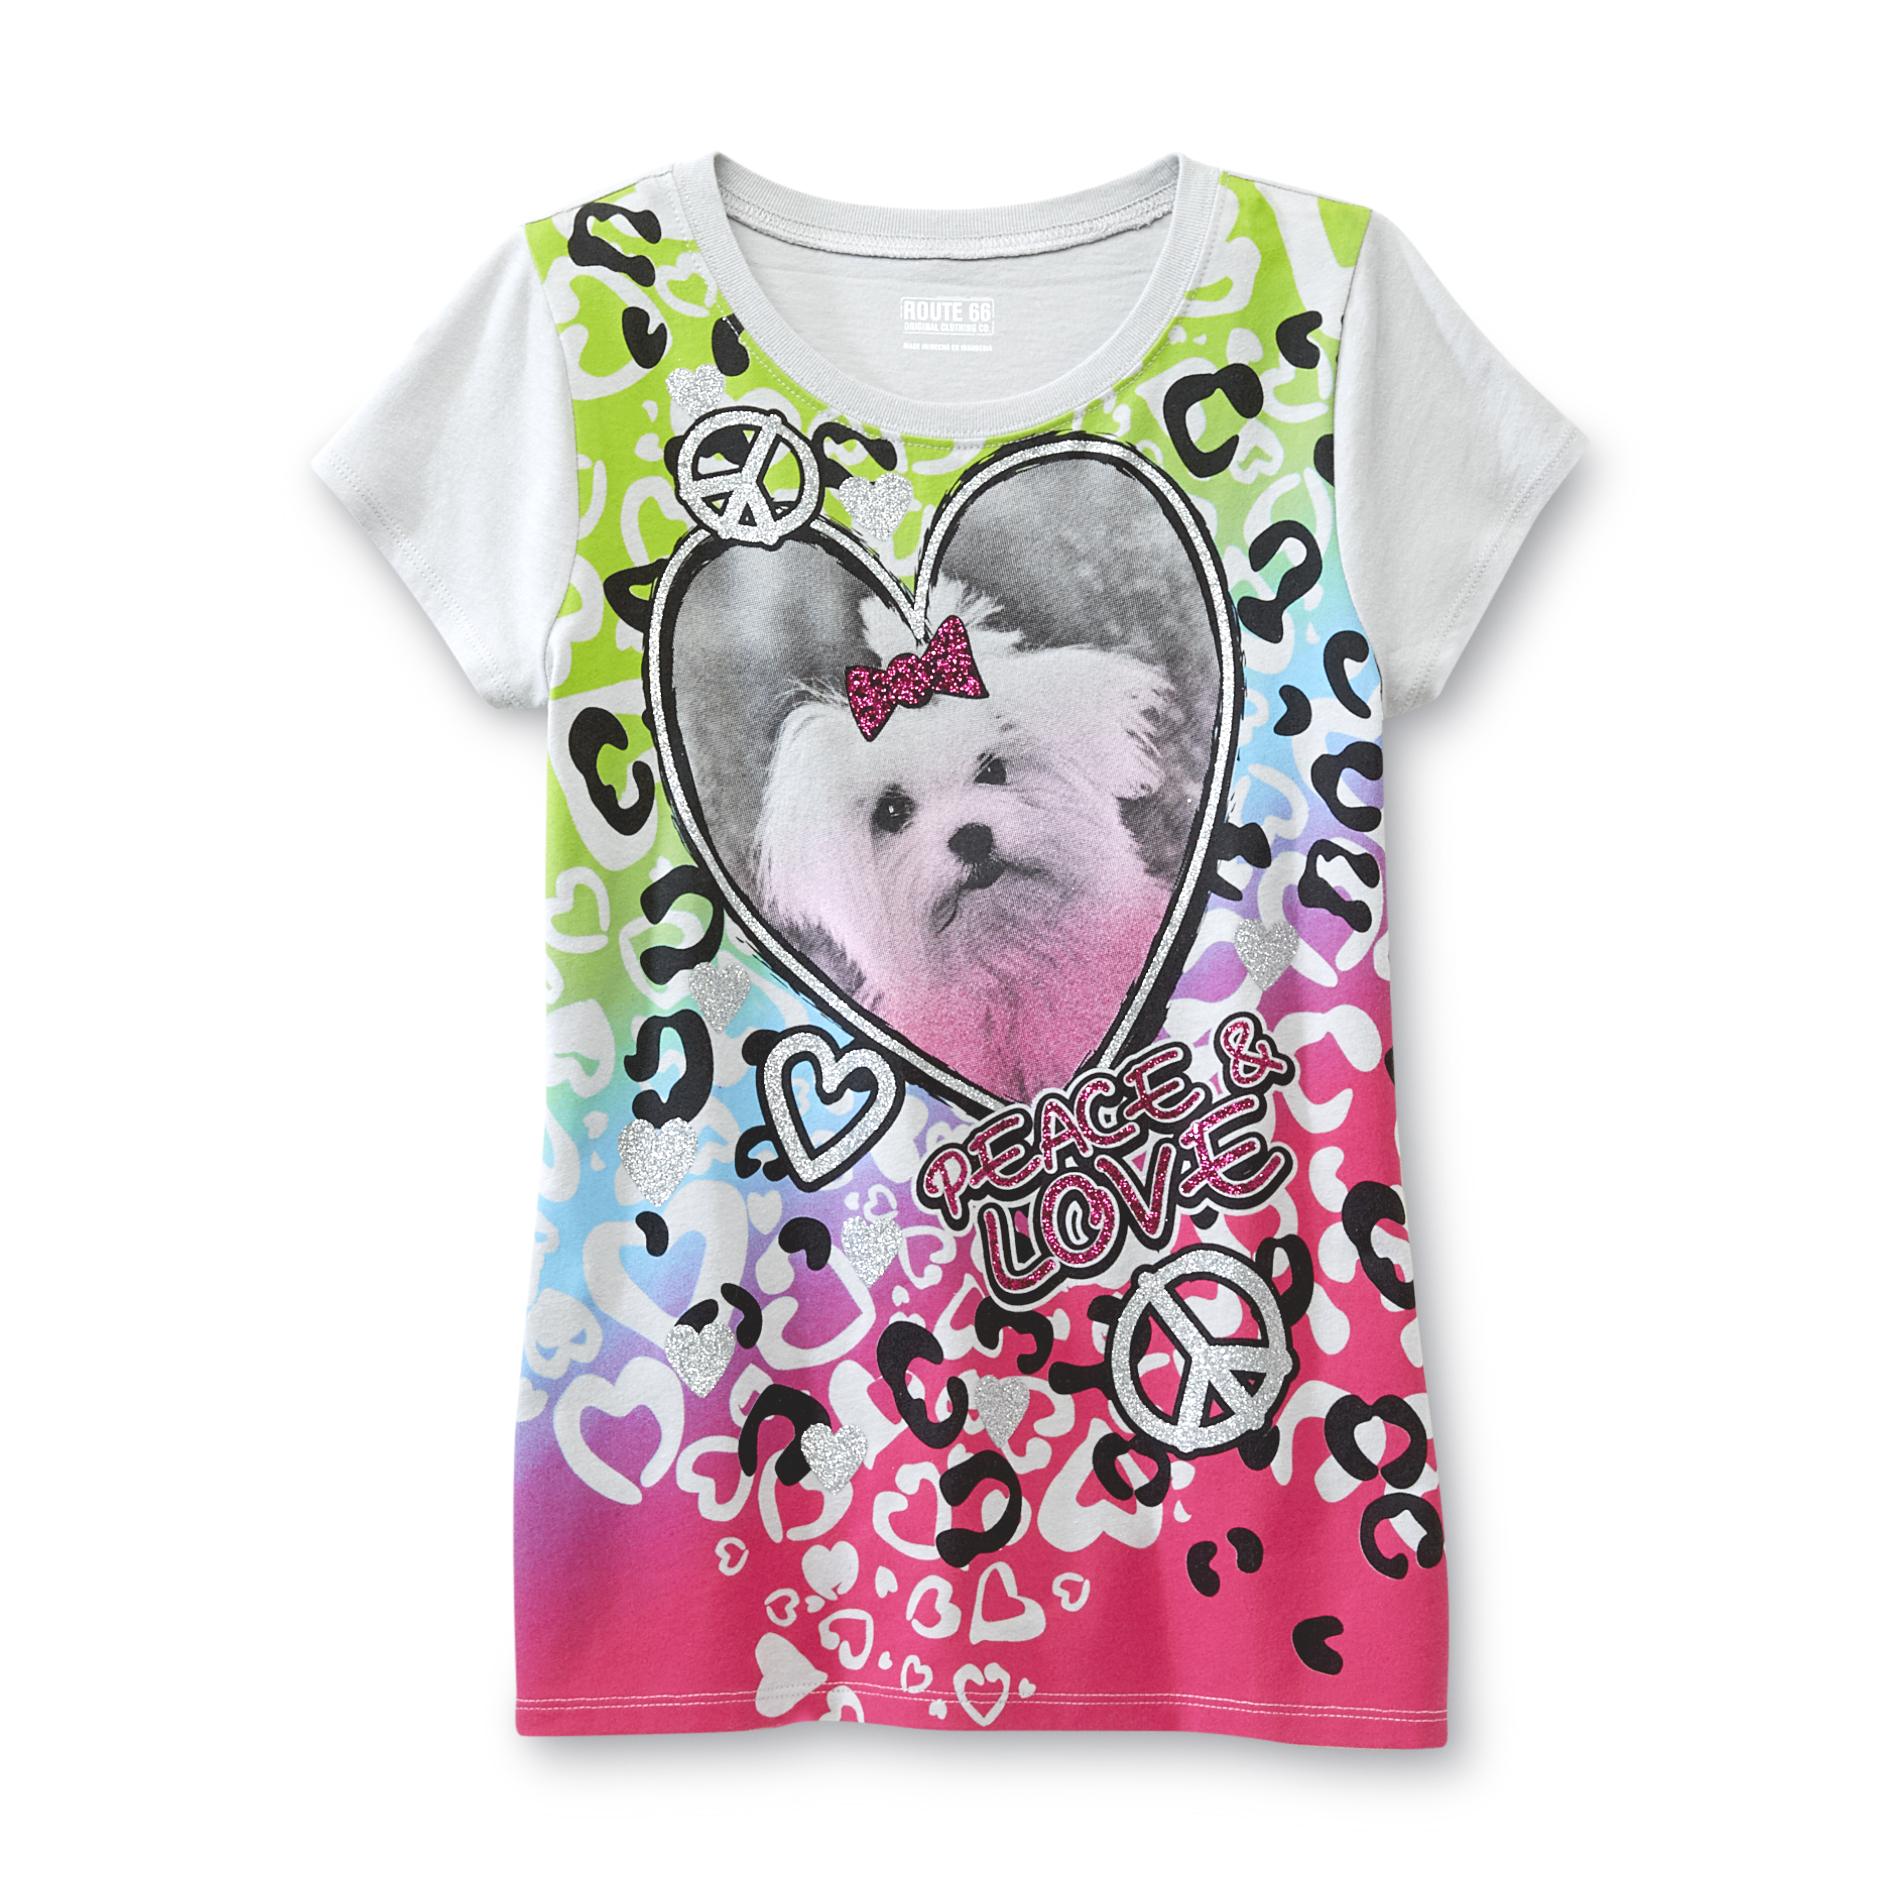 Route 66 Girl's Peace & Love Sparkle T-Shirt - Dog